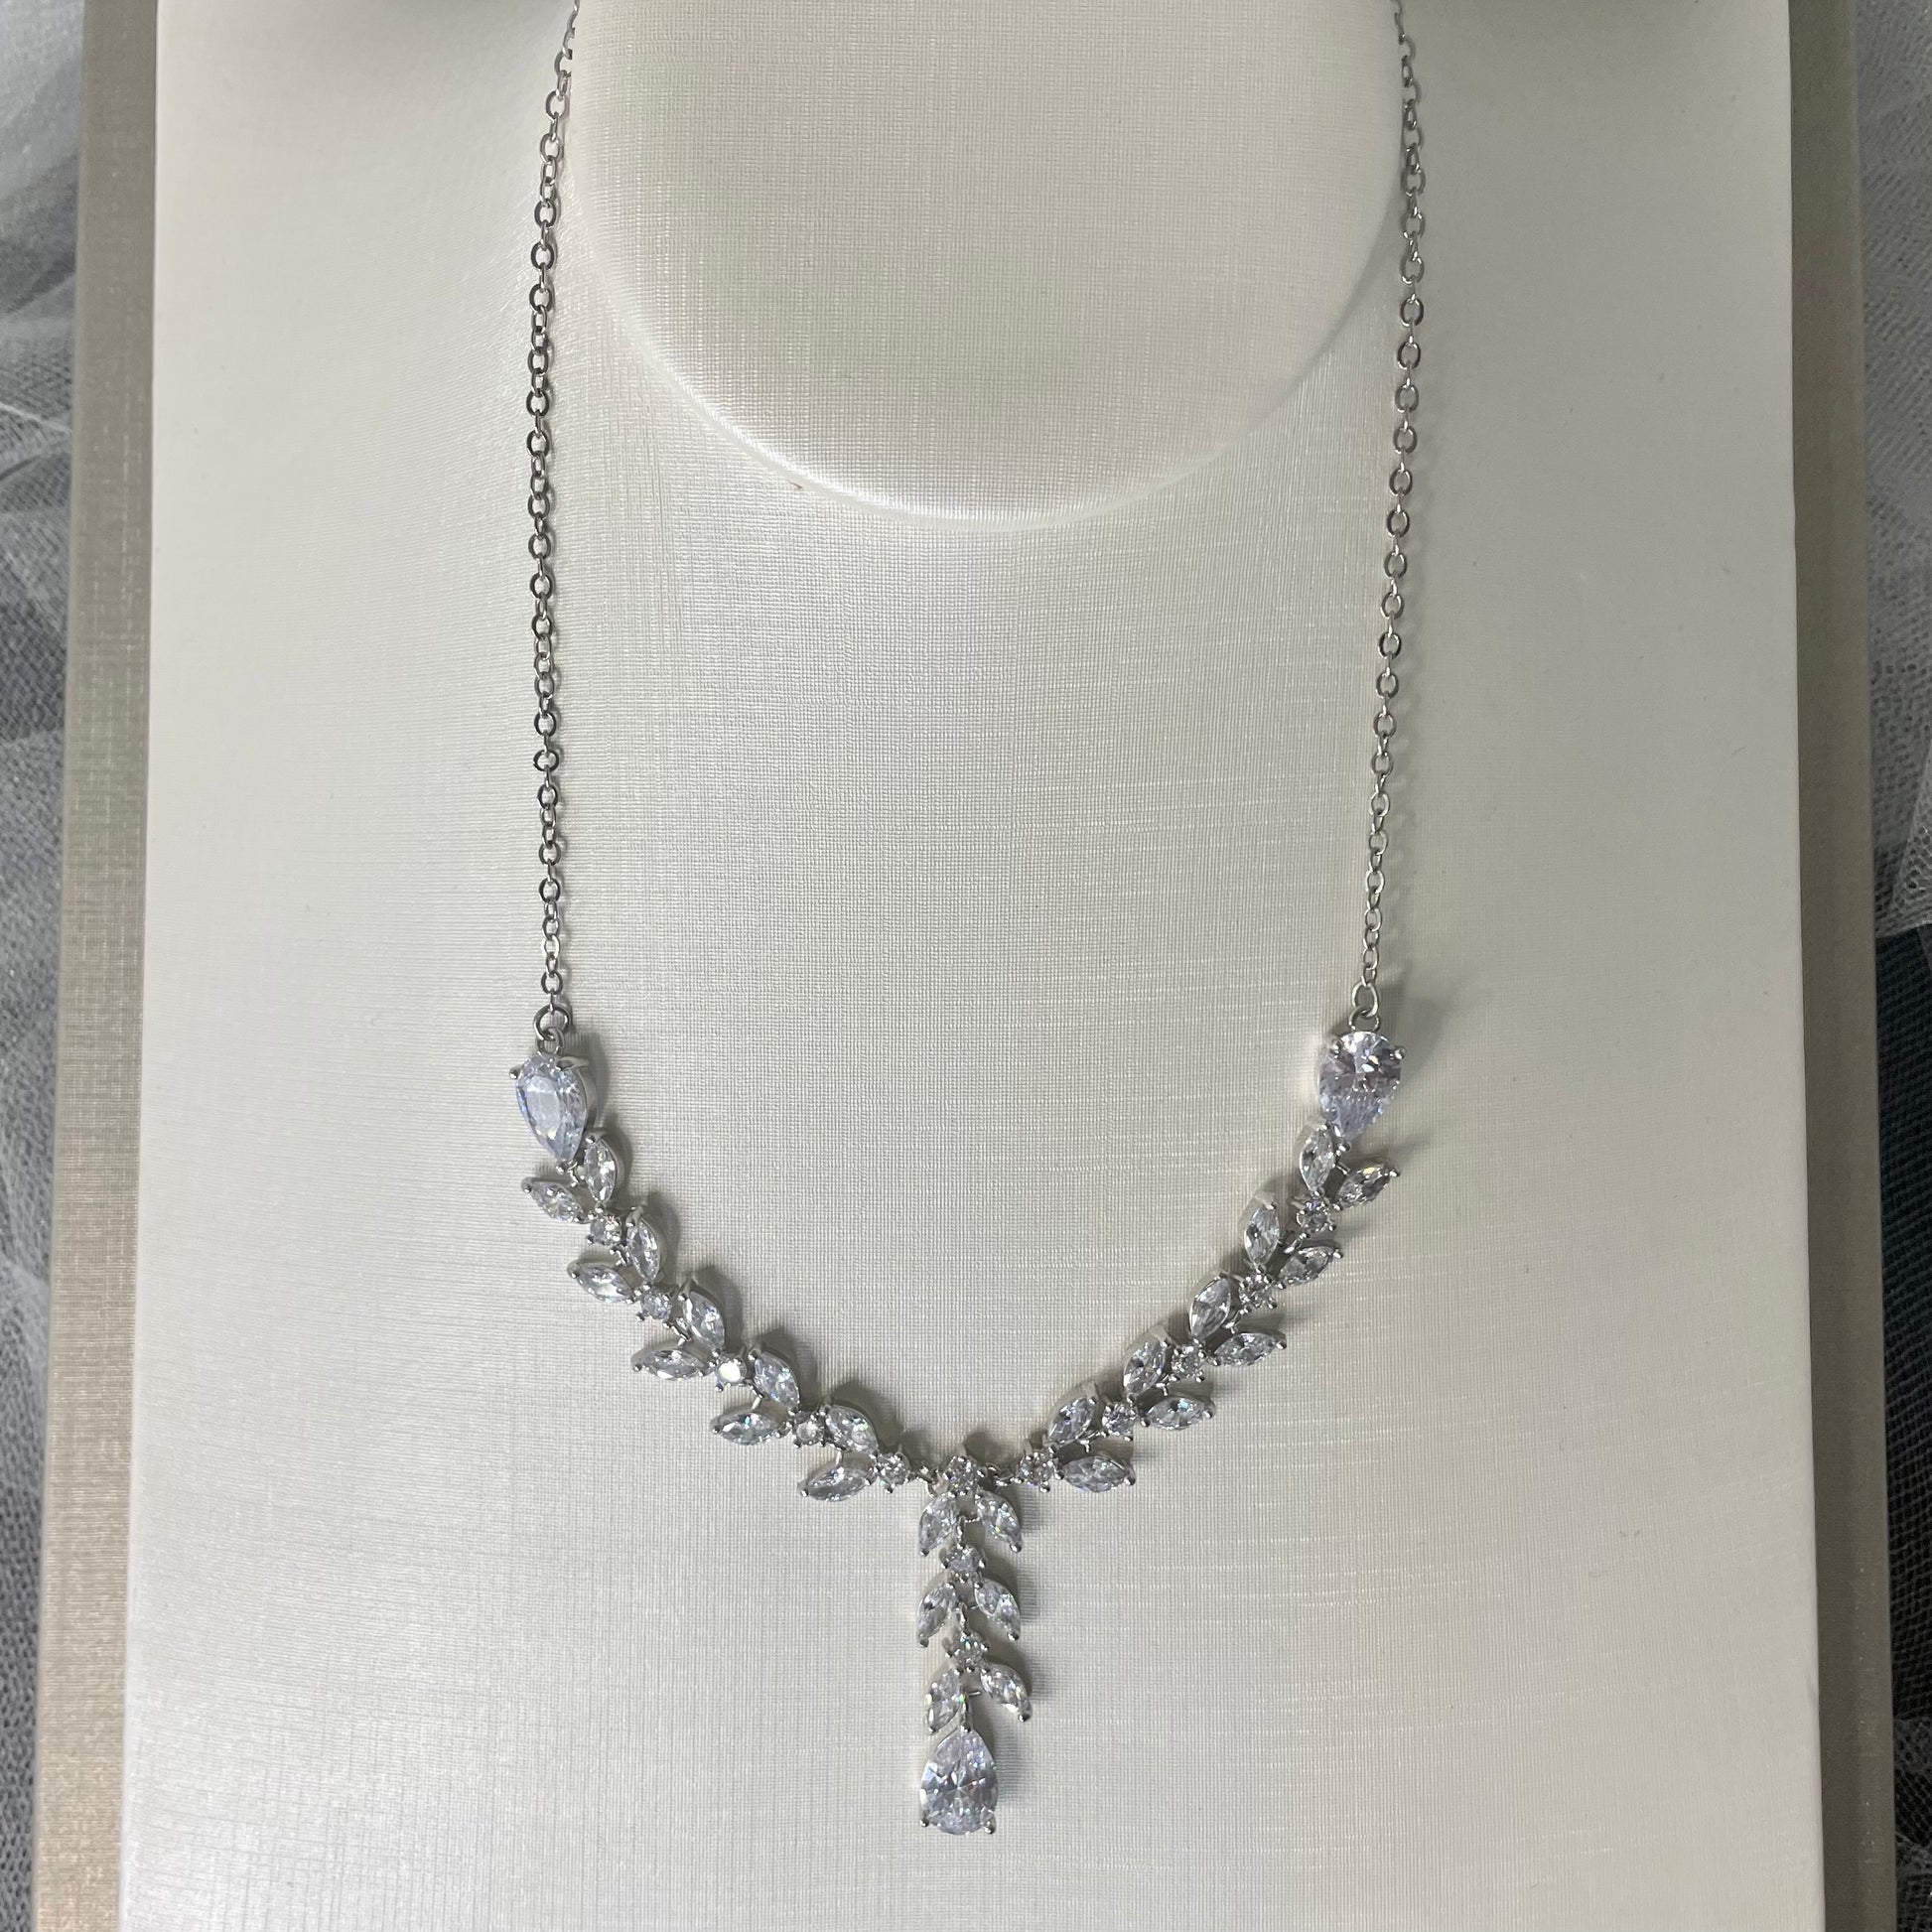 "Madeleine, Exquisite Leaf-Inspired Bridal Necklace for Elegance on Your Special Day"